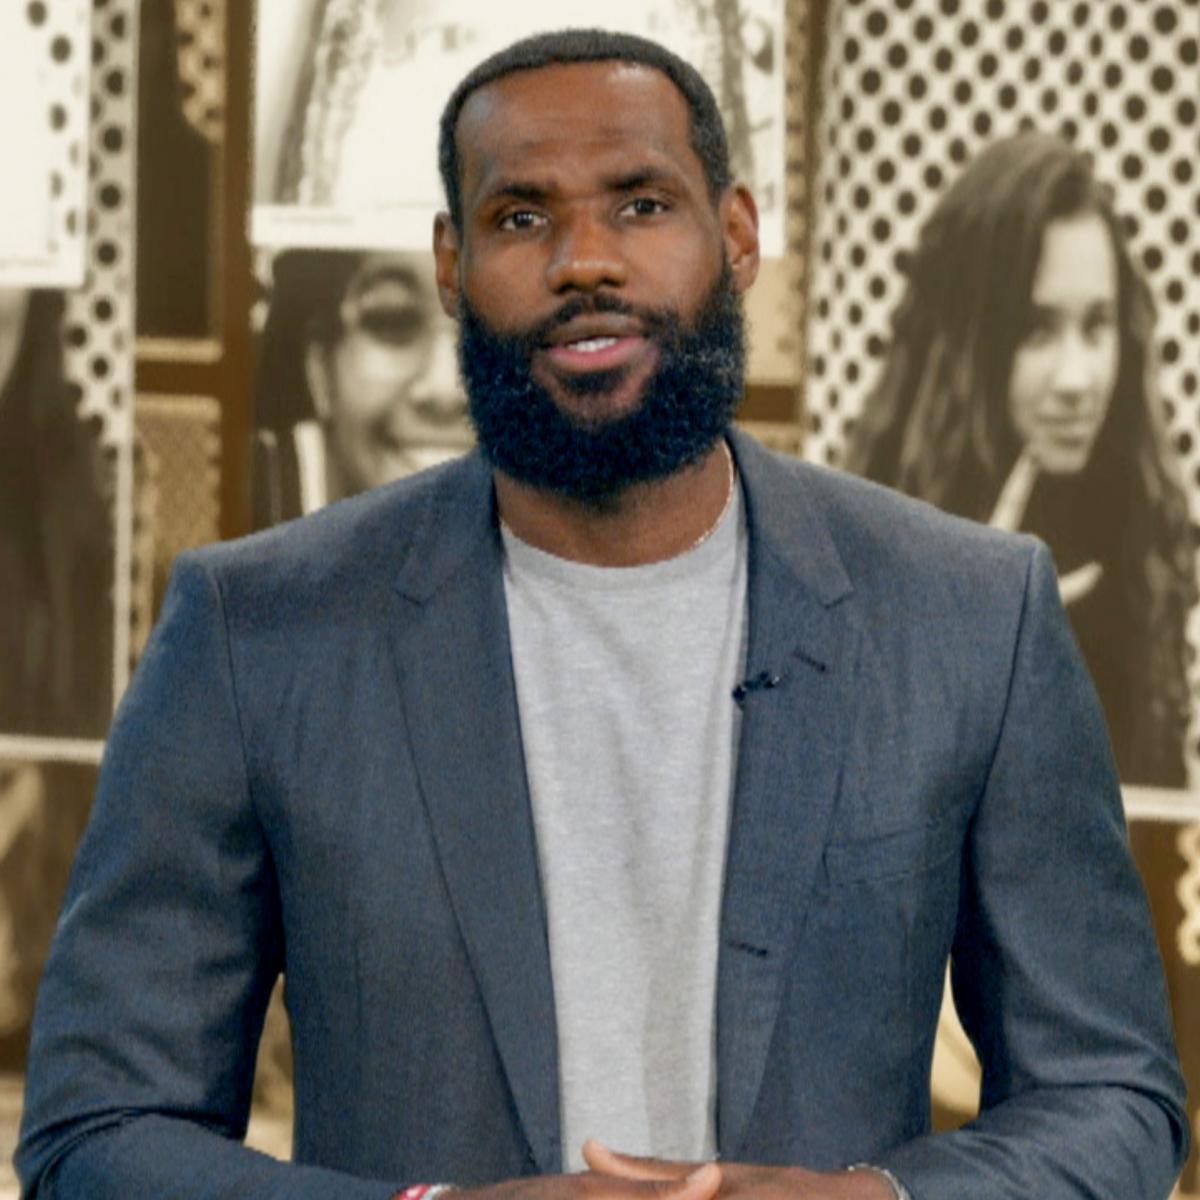 Lakers’ LeBron James Rebukes ‘Shut Up and Dribble’ in Instagram Video